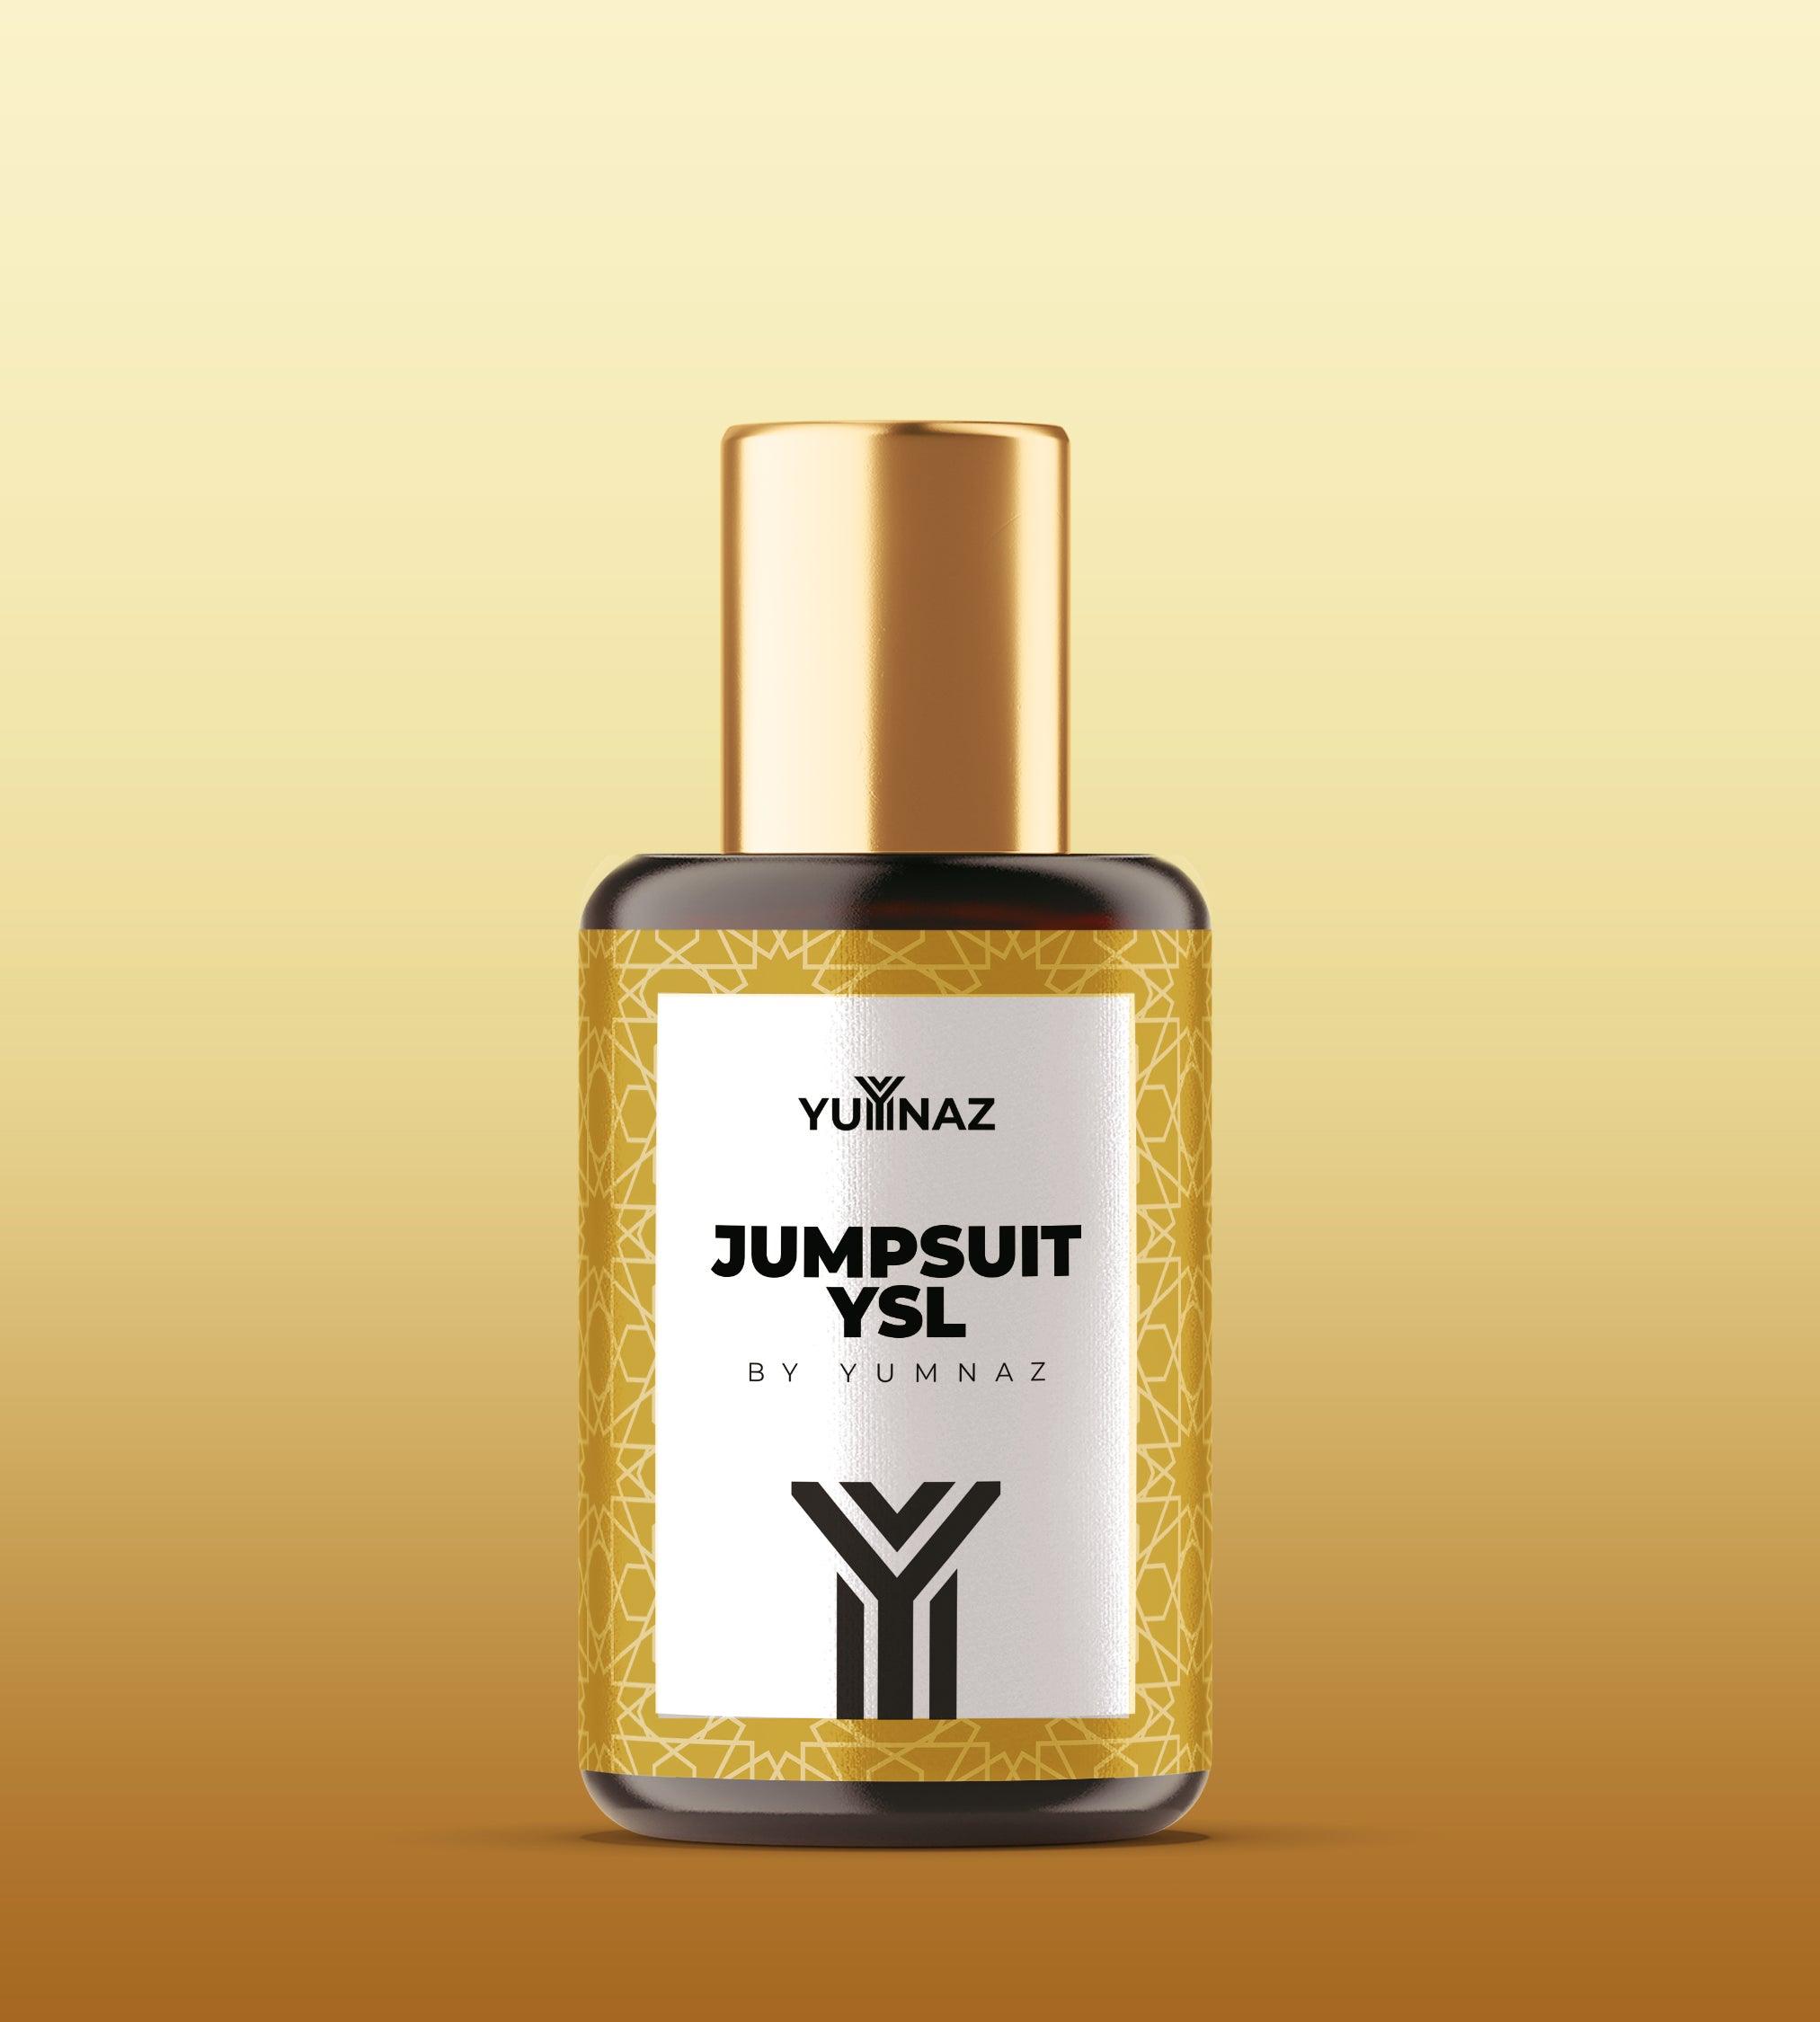 Get the Jumpsuit Ysl Perfume on a reasonable Price in Pakistan - yumnaz